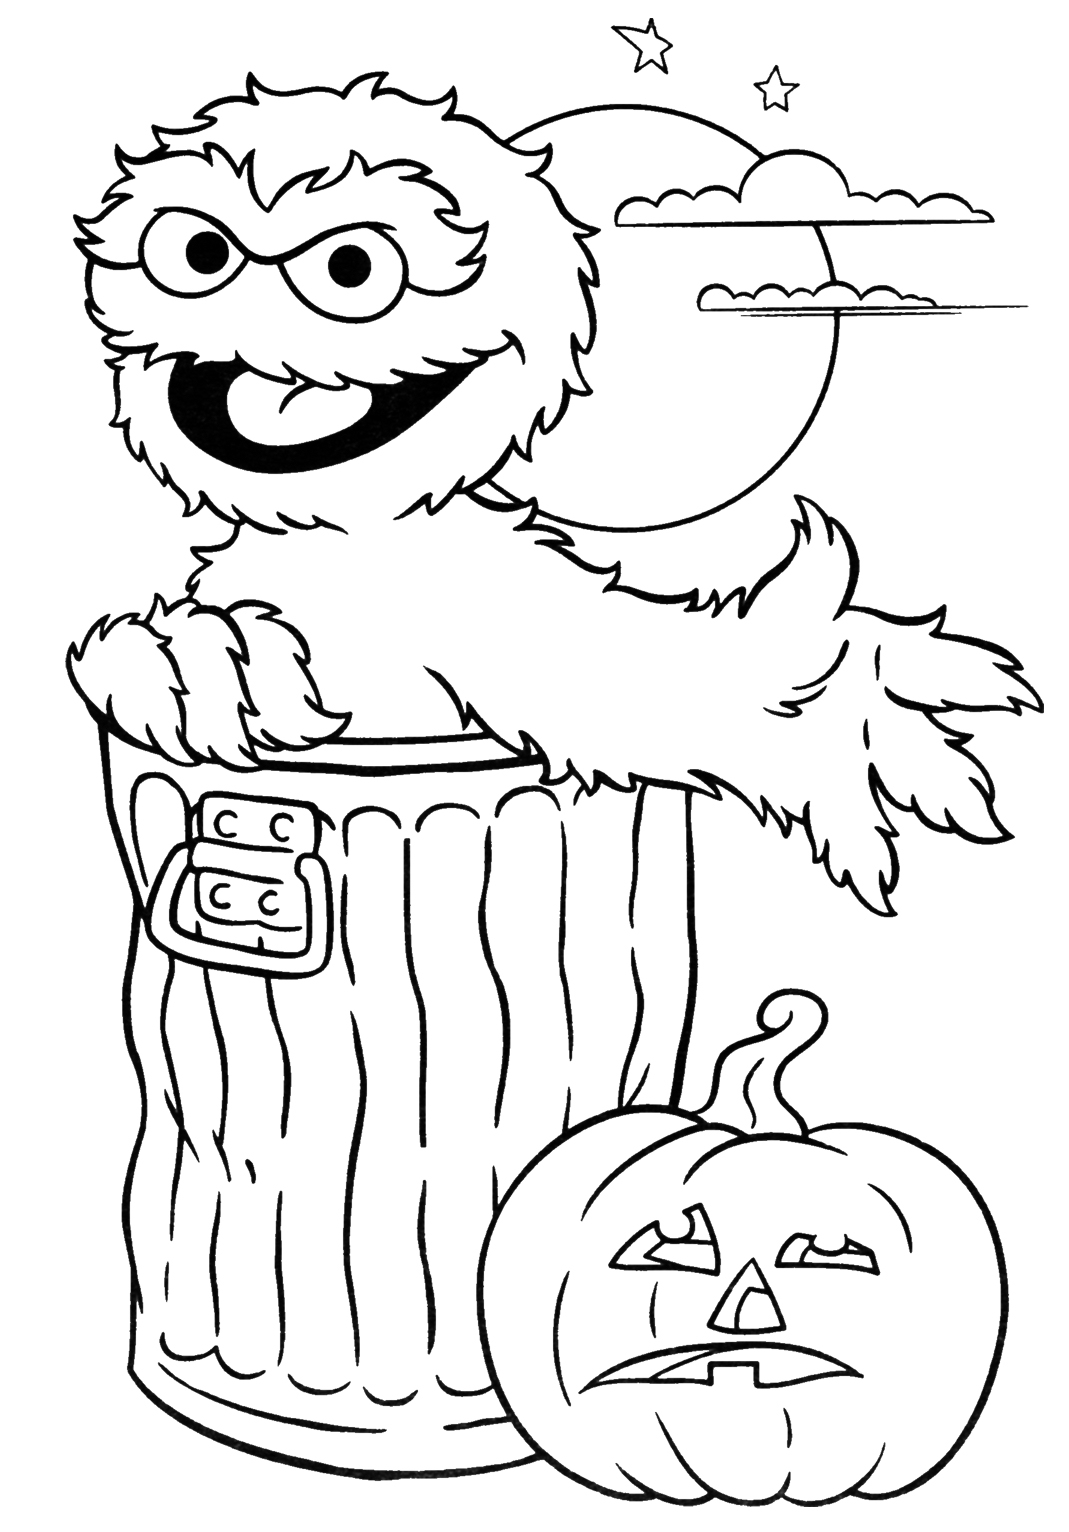 Oscar The Grouch Coloring Page at GetColorings.com | Free printable